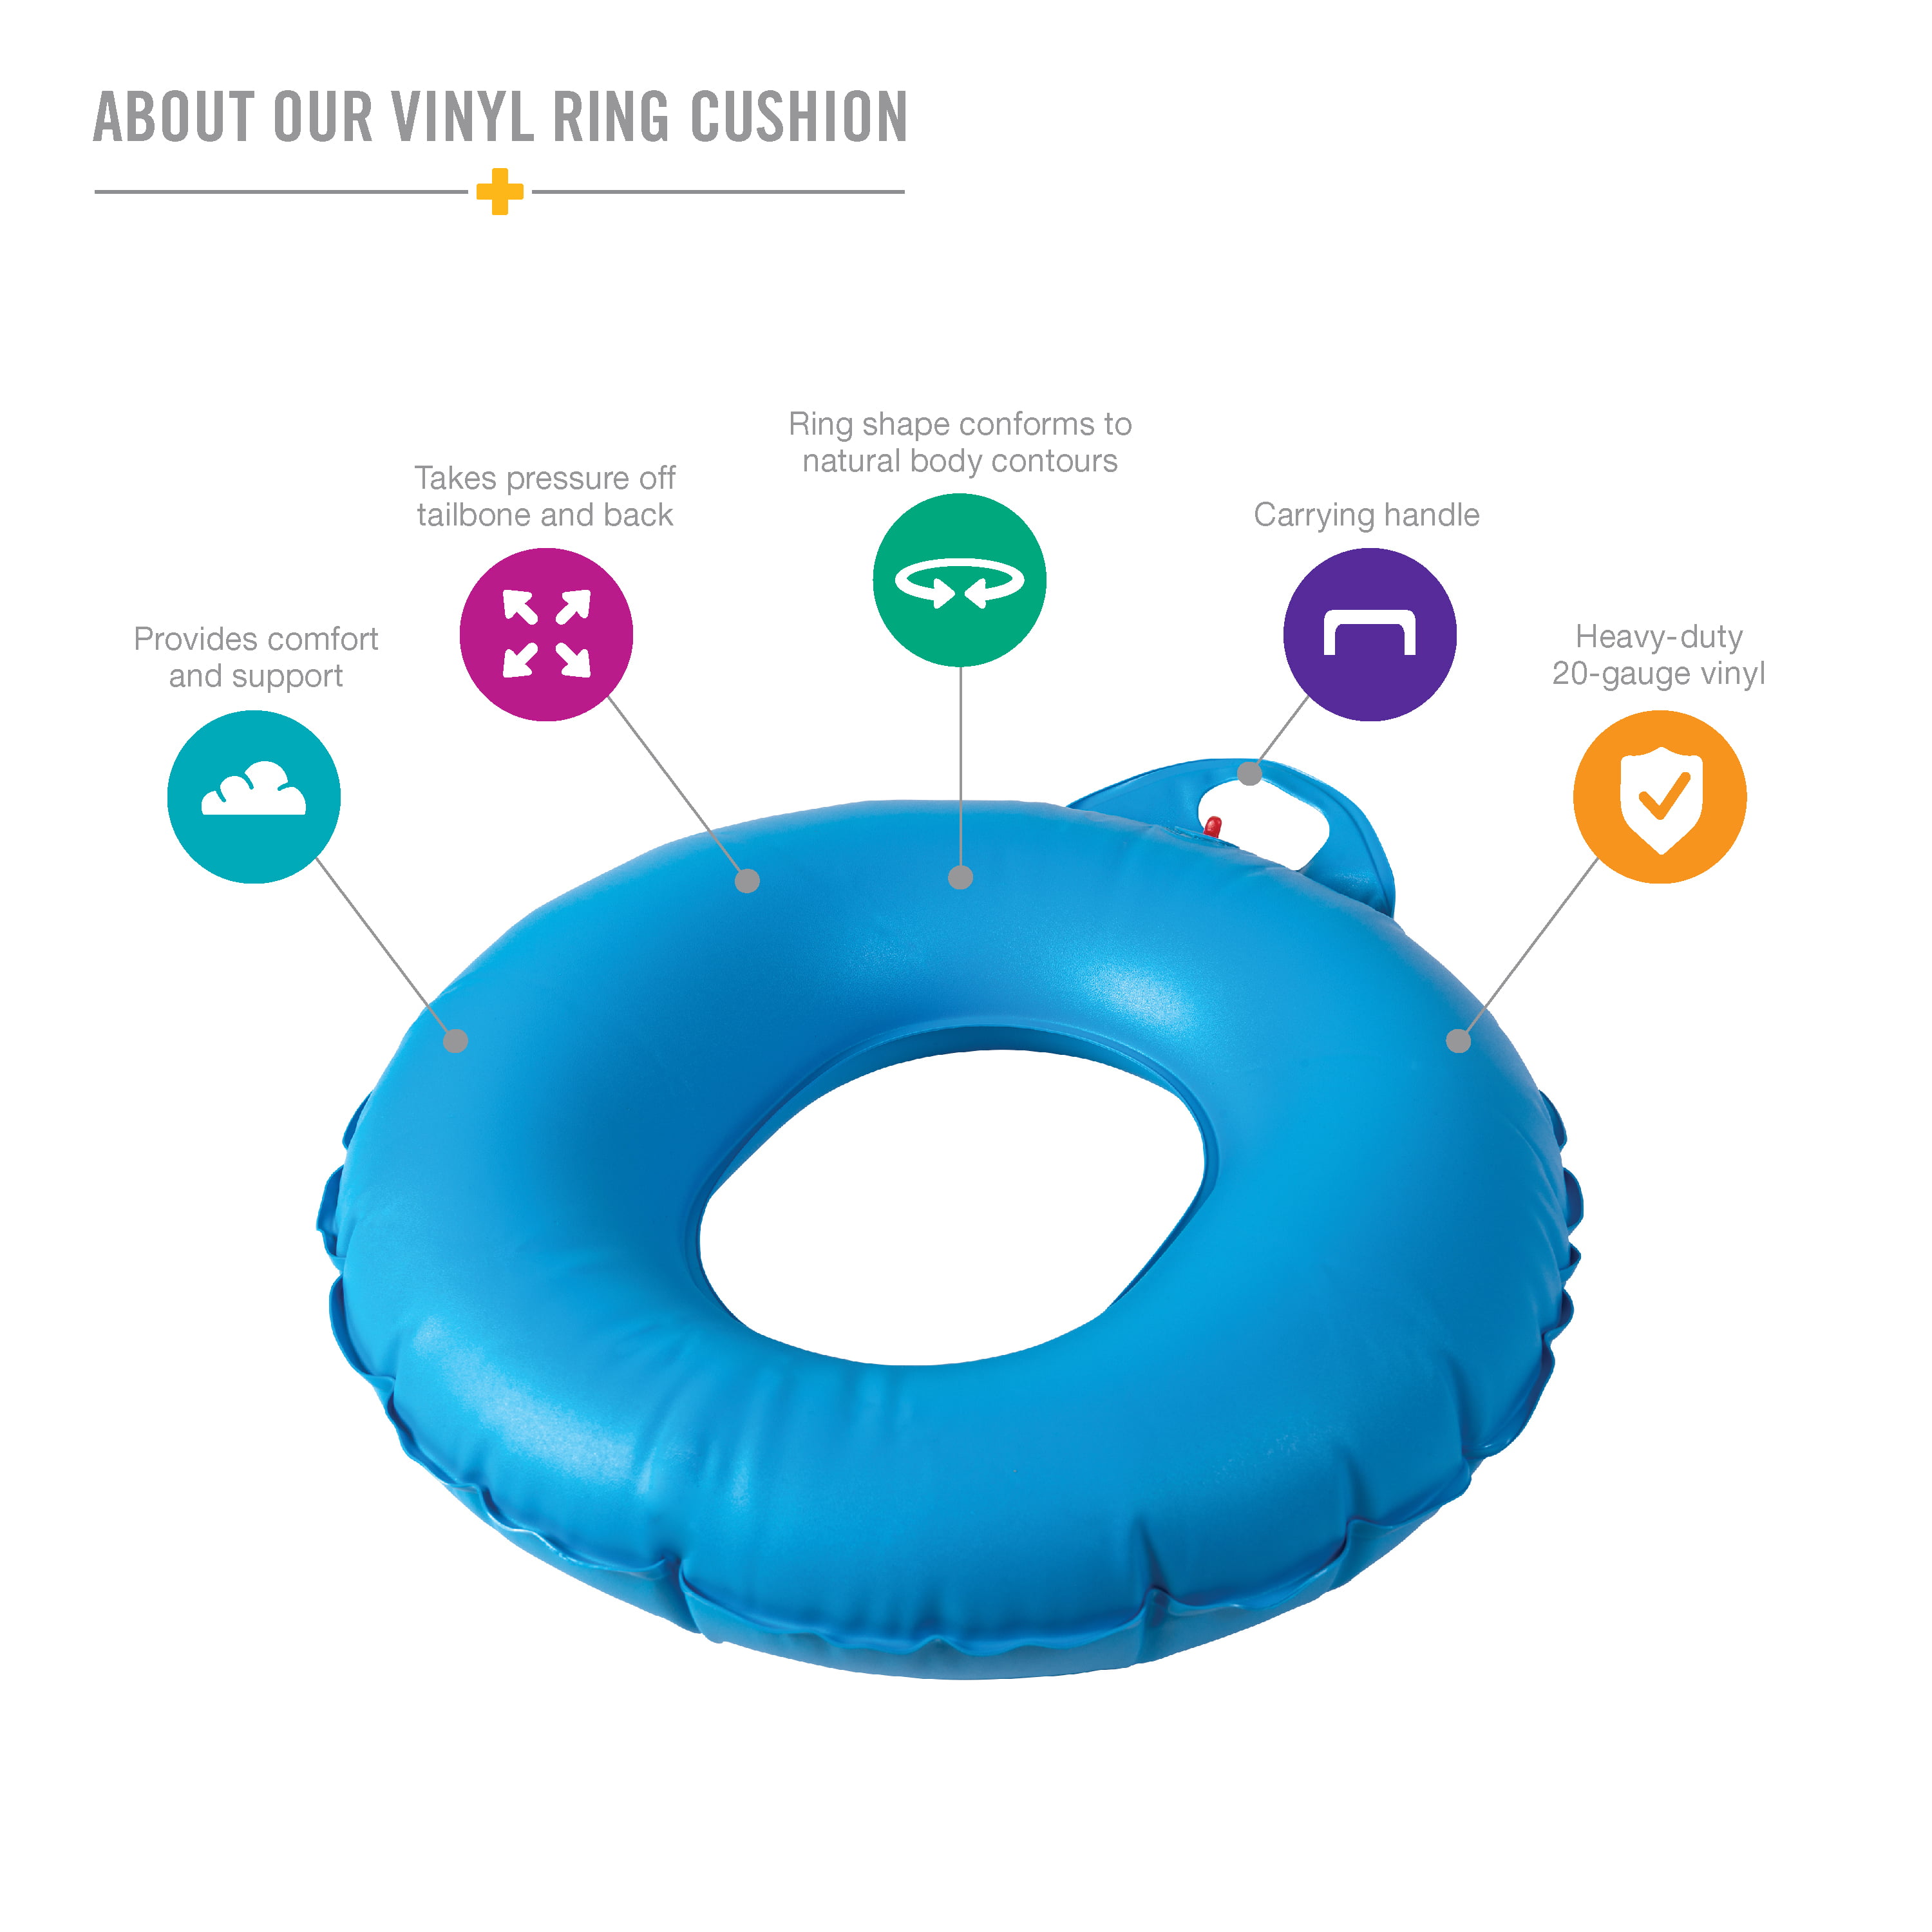 Roofei 15 Inflatable Donut Cushion for Tailbone Pain Relief Donut